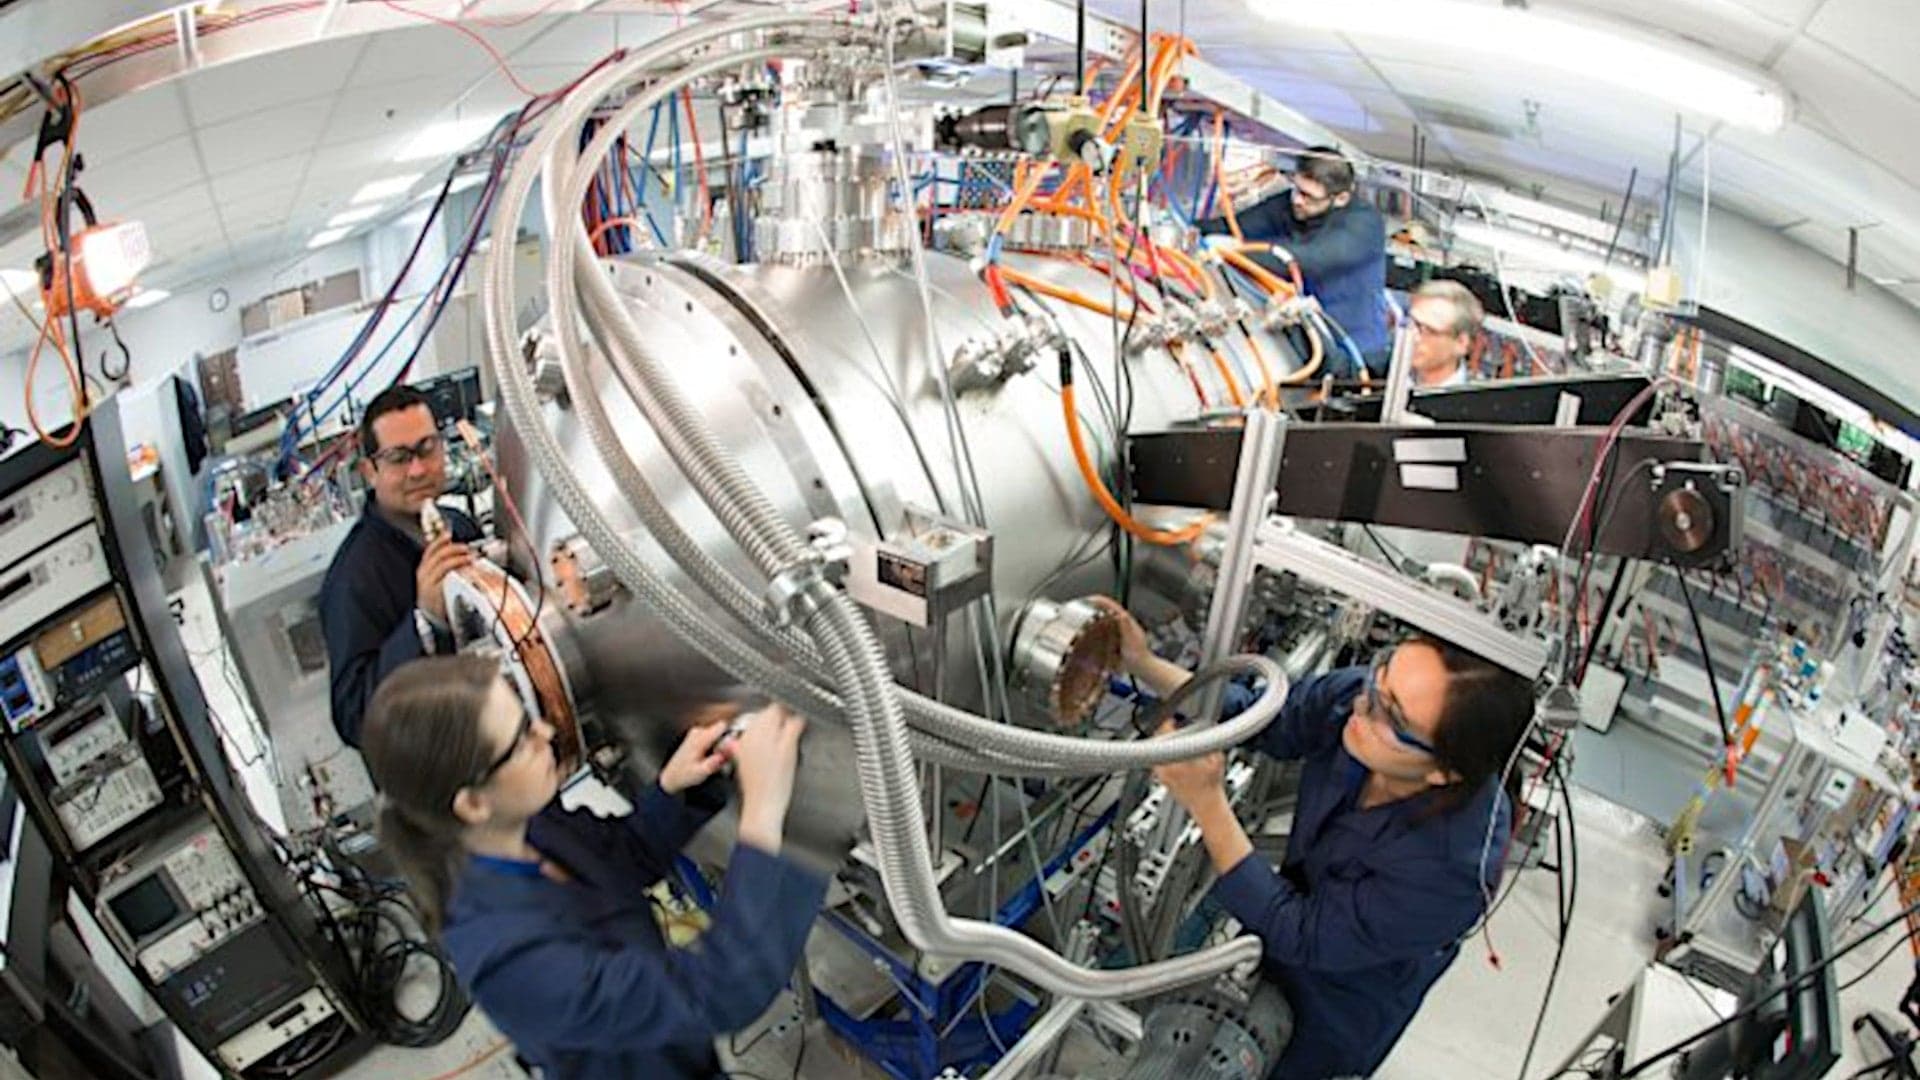 Skunk Works’ Exotic Fusion Reactor Program Moves Forward With Larger, More Powerful Design